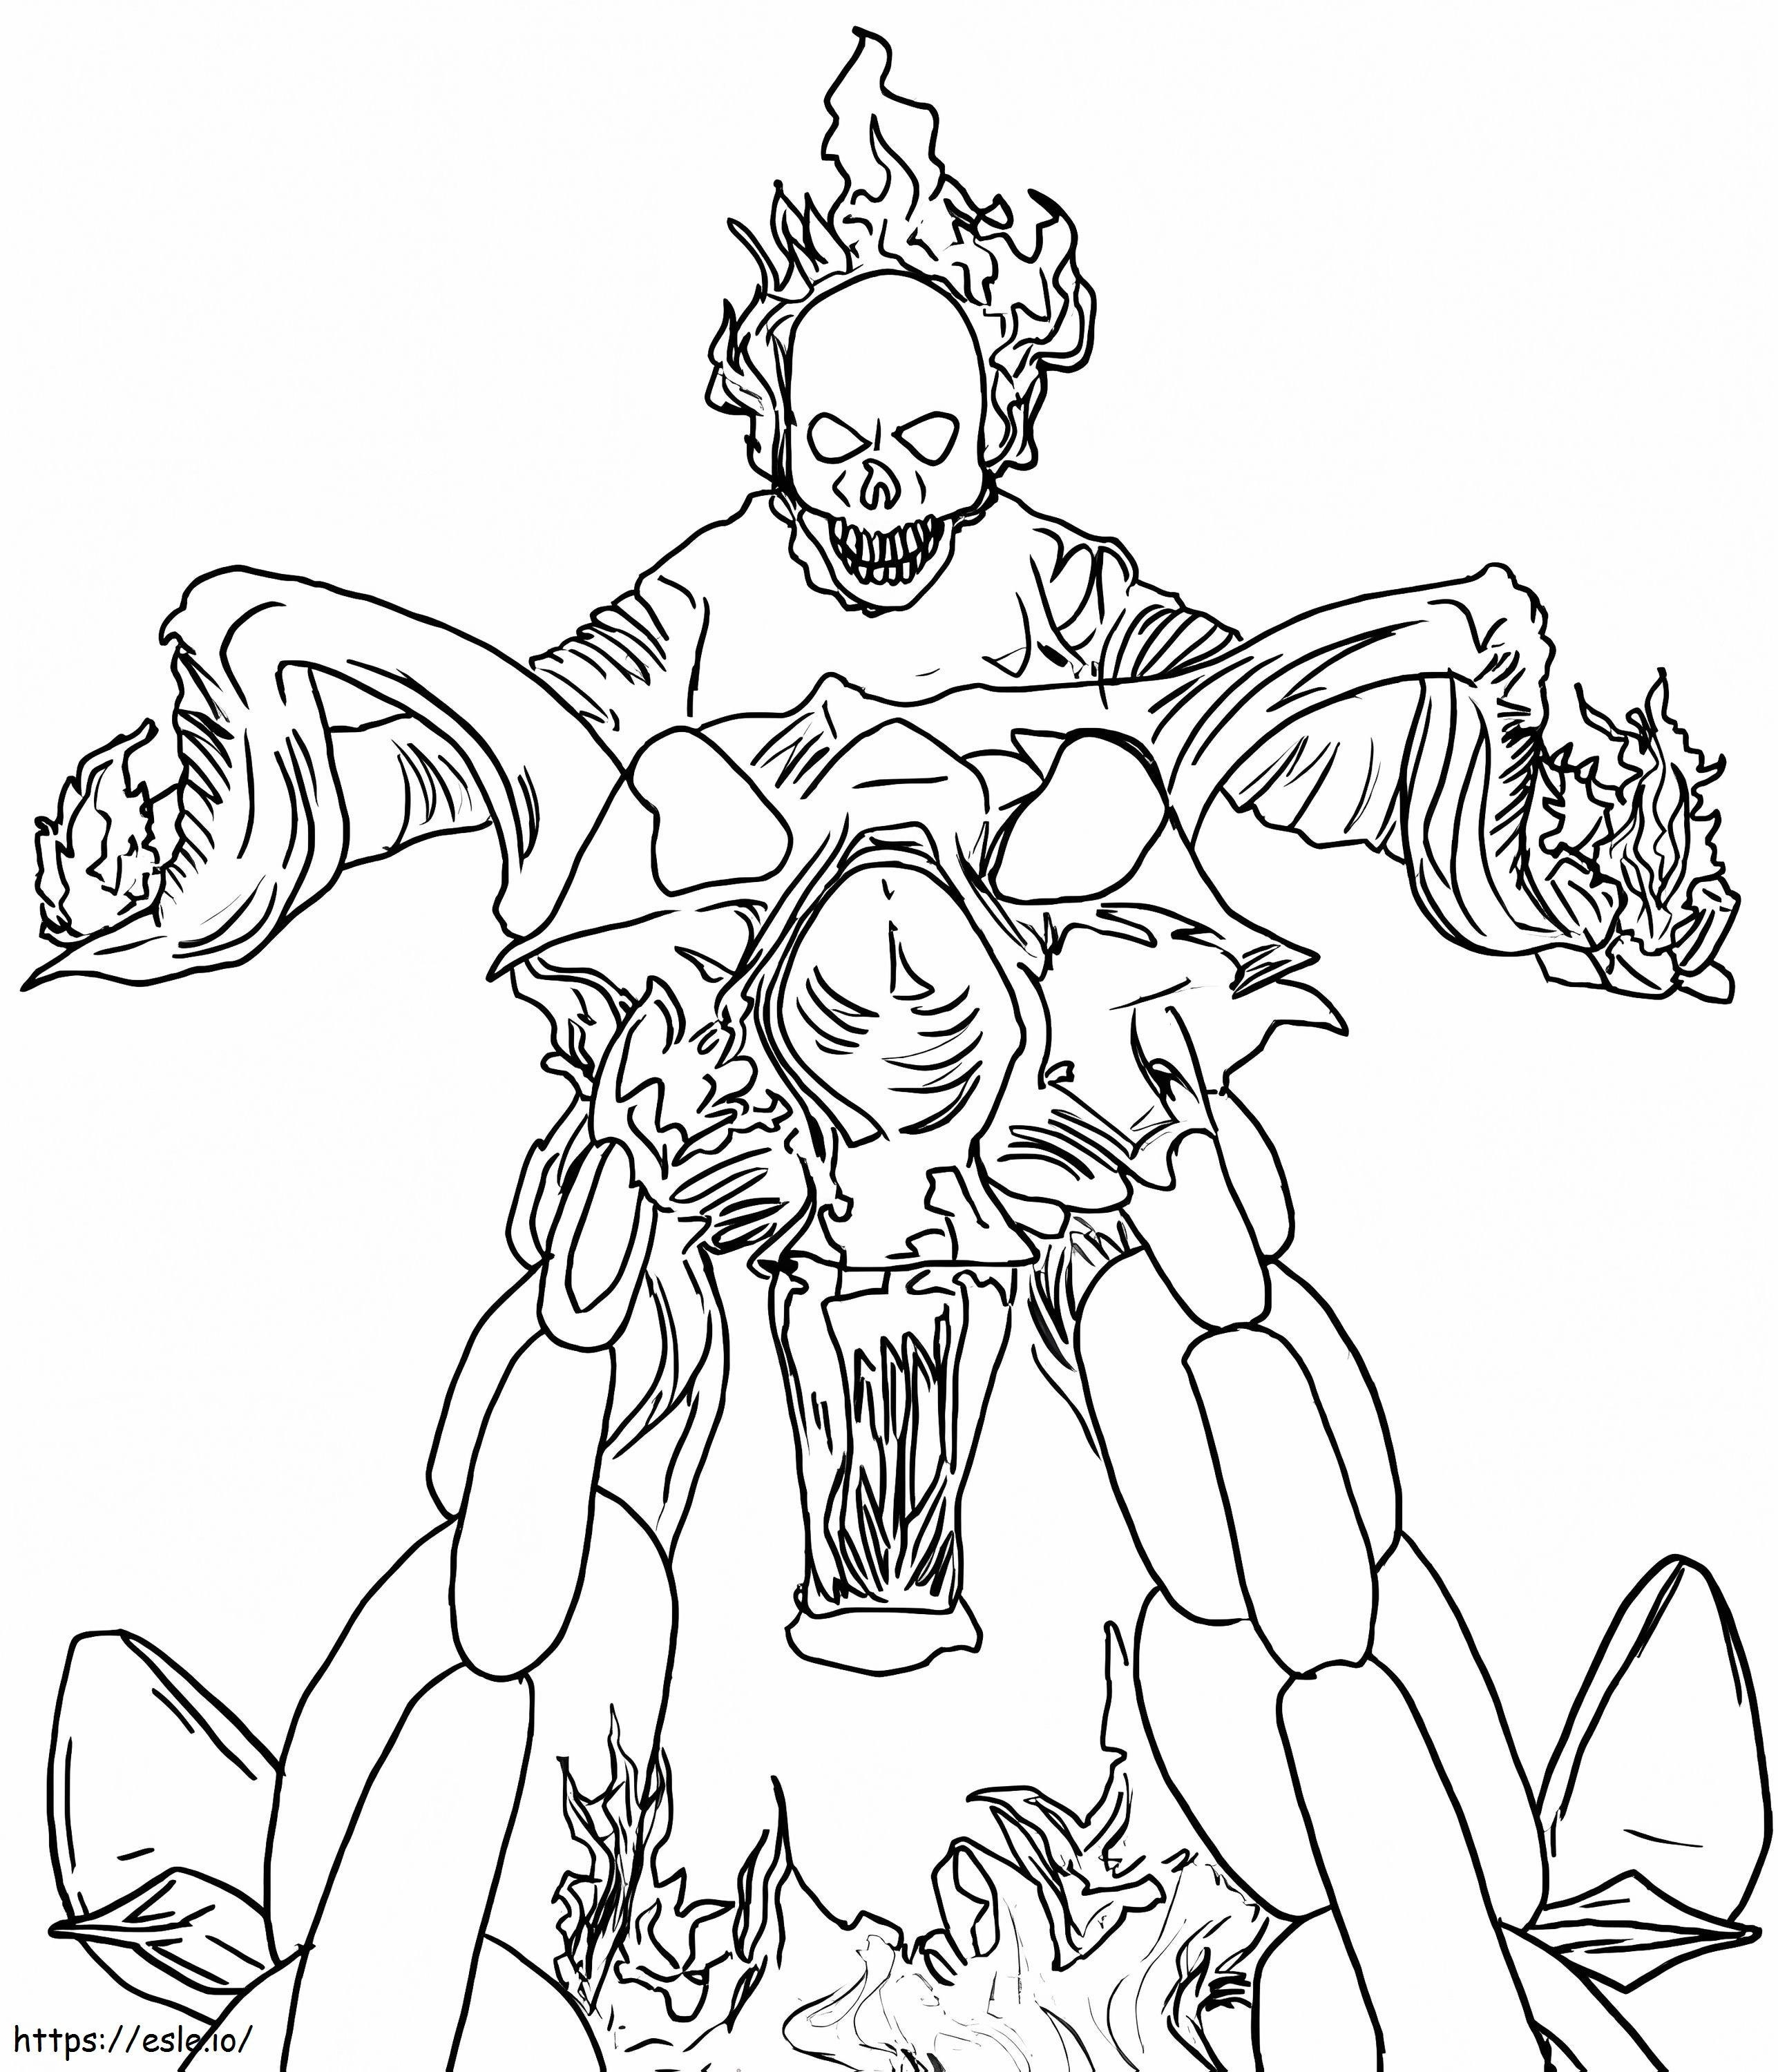 Awesome Ghost Rider coloring page